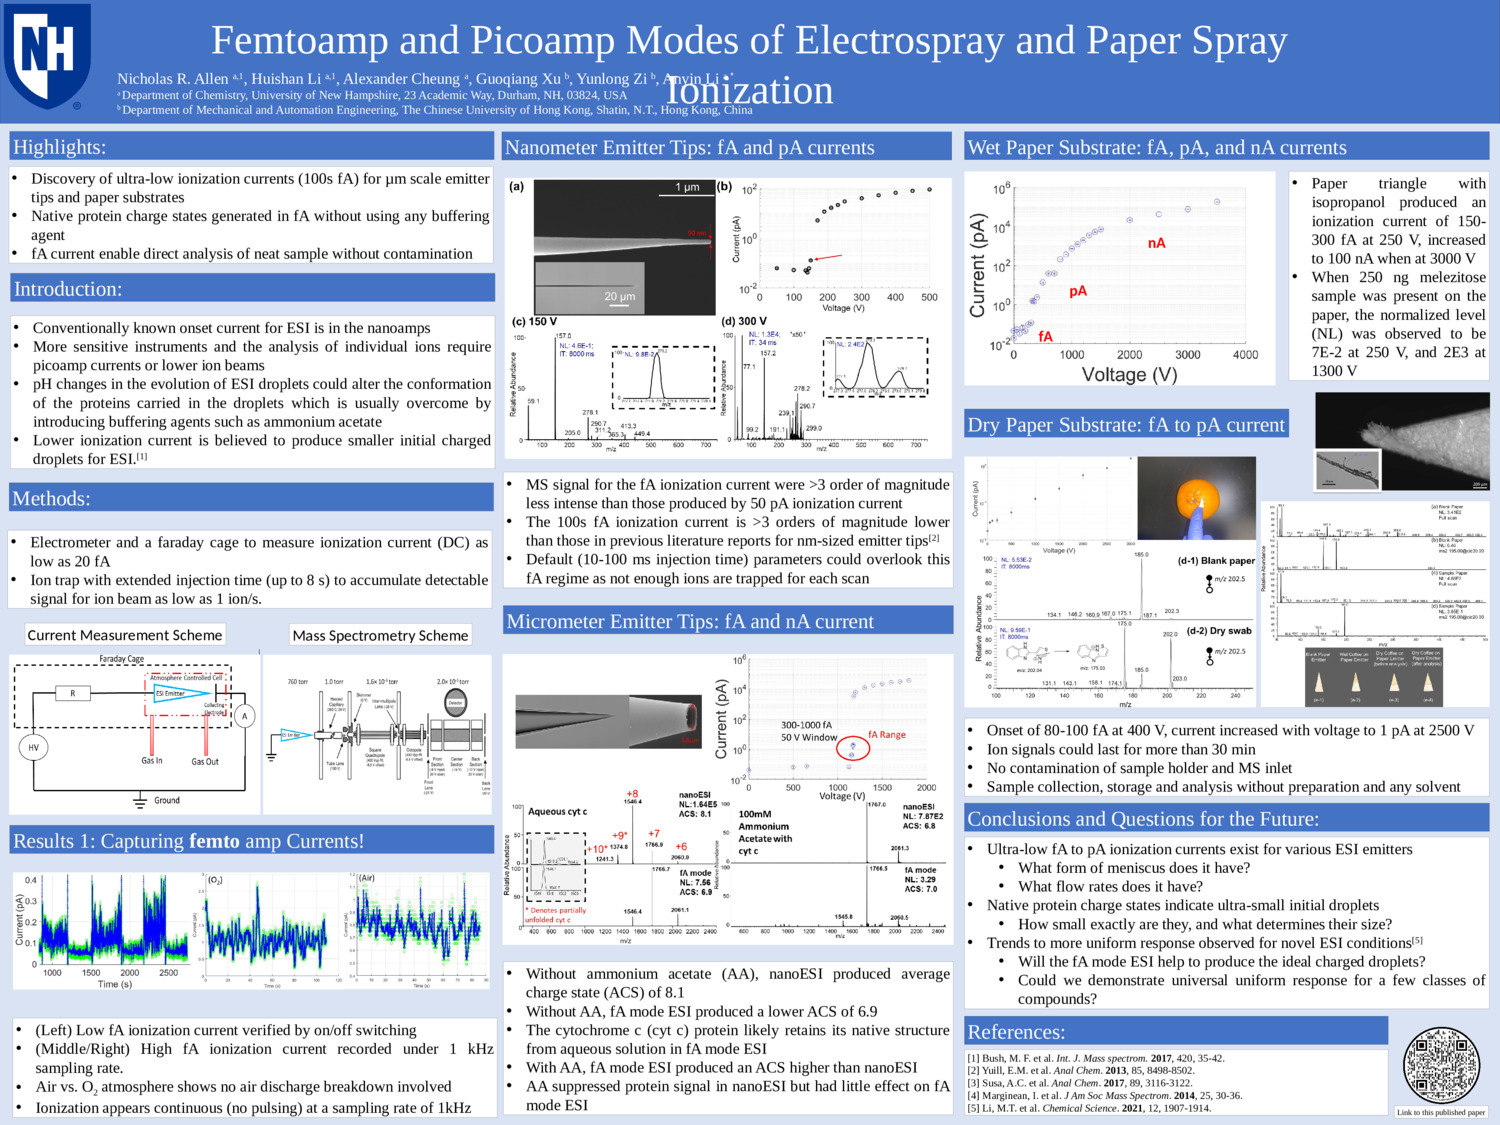 Femtoamp And Picoamp Modes Of Electrospray And Paper Spray Ionization by nra1001